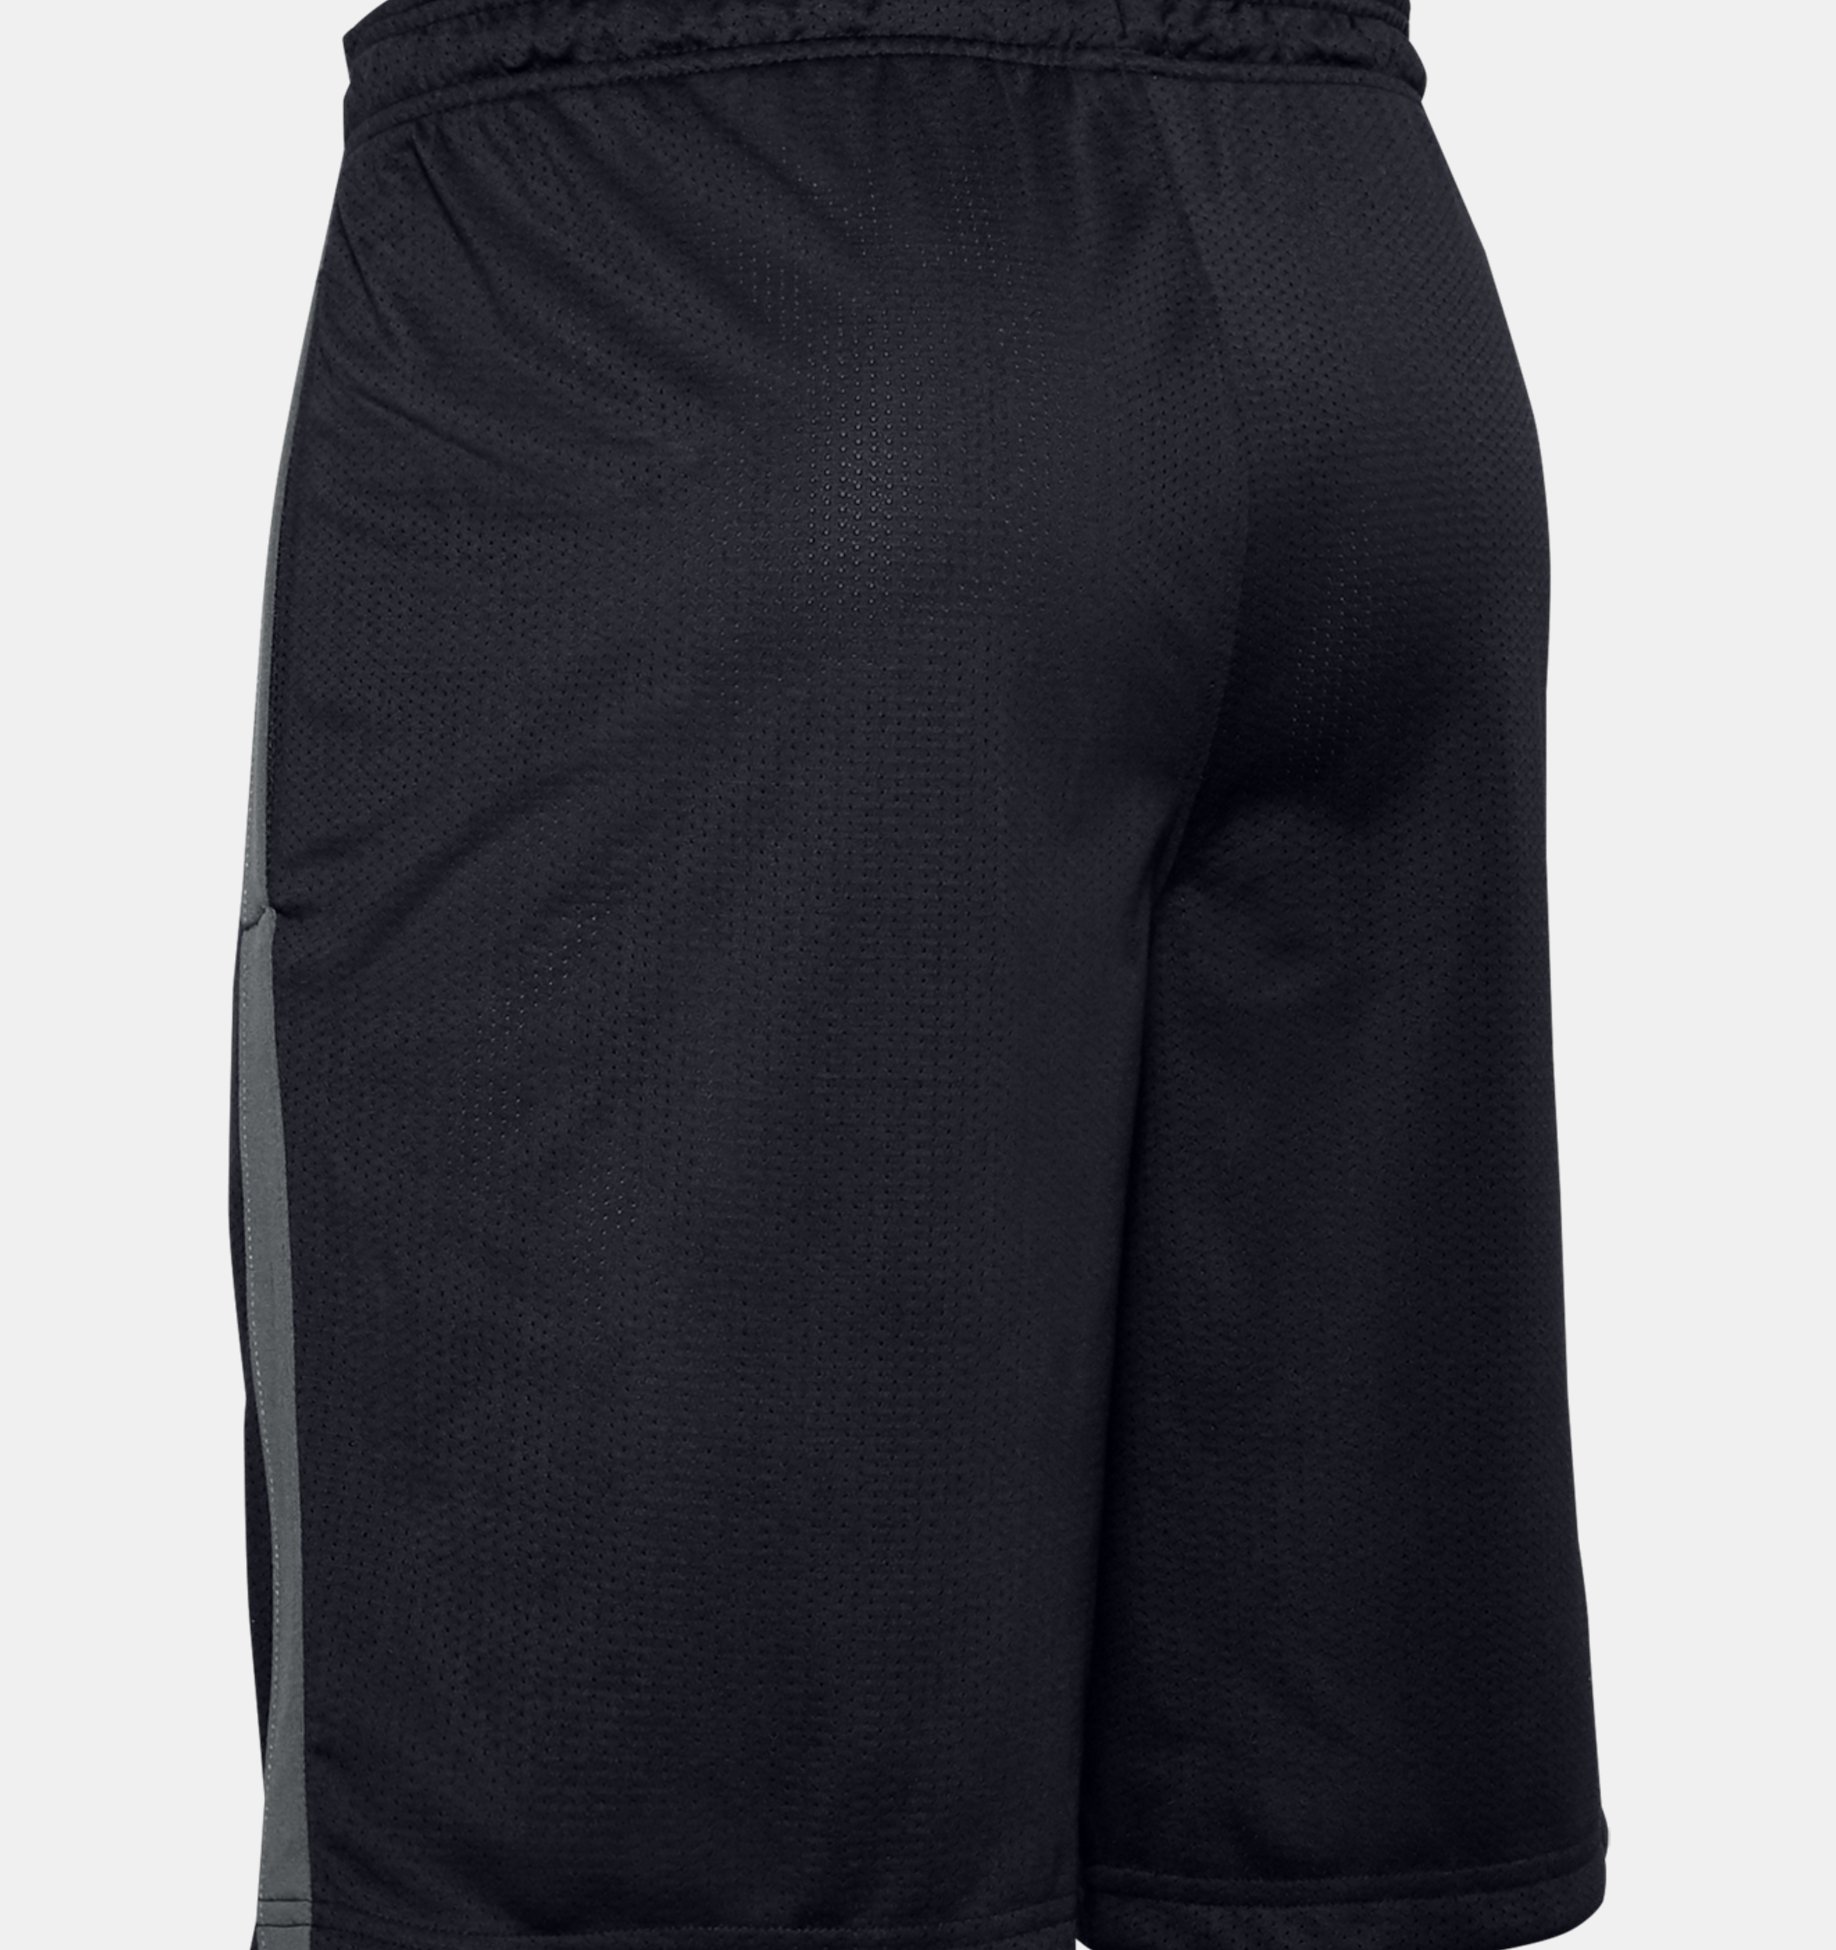 Under Armour UA Mens Tech Mesh Gym Fitness Workout Training Sports Shorts 